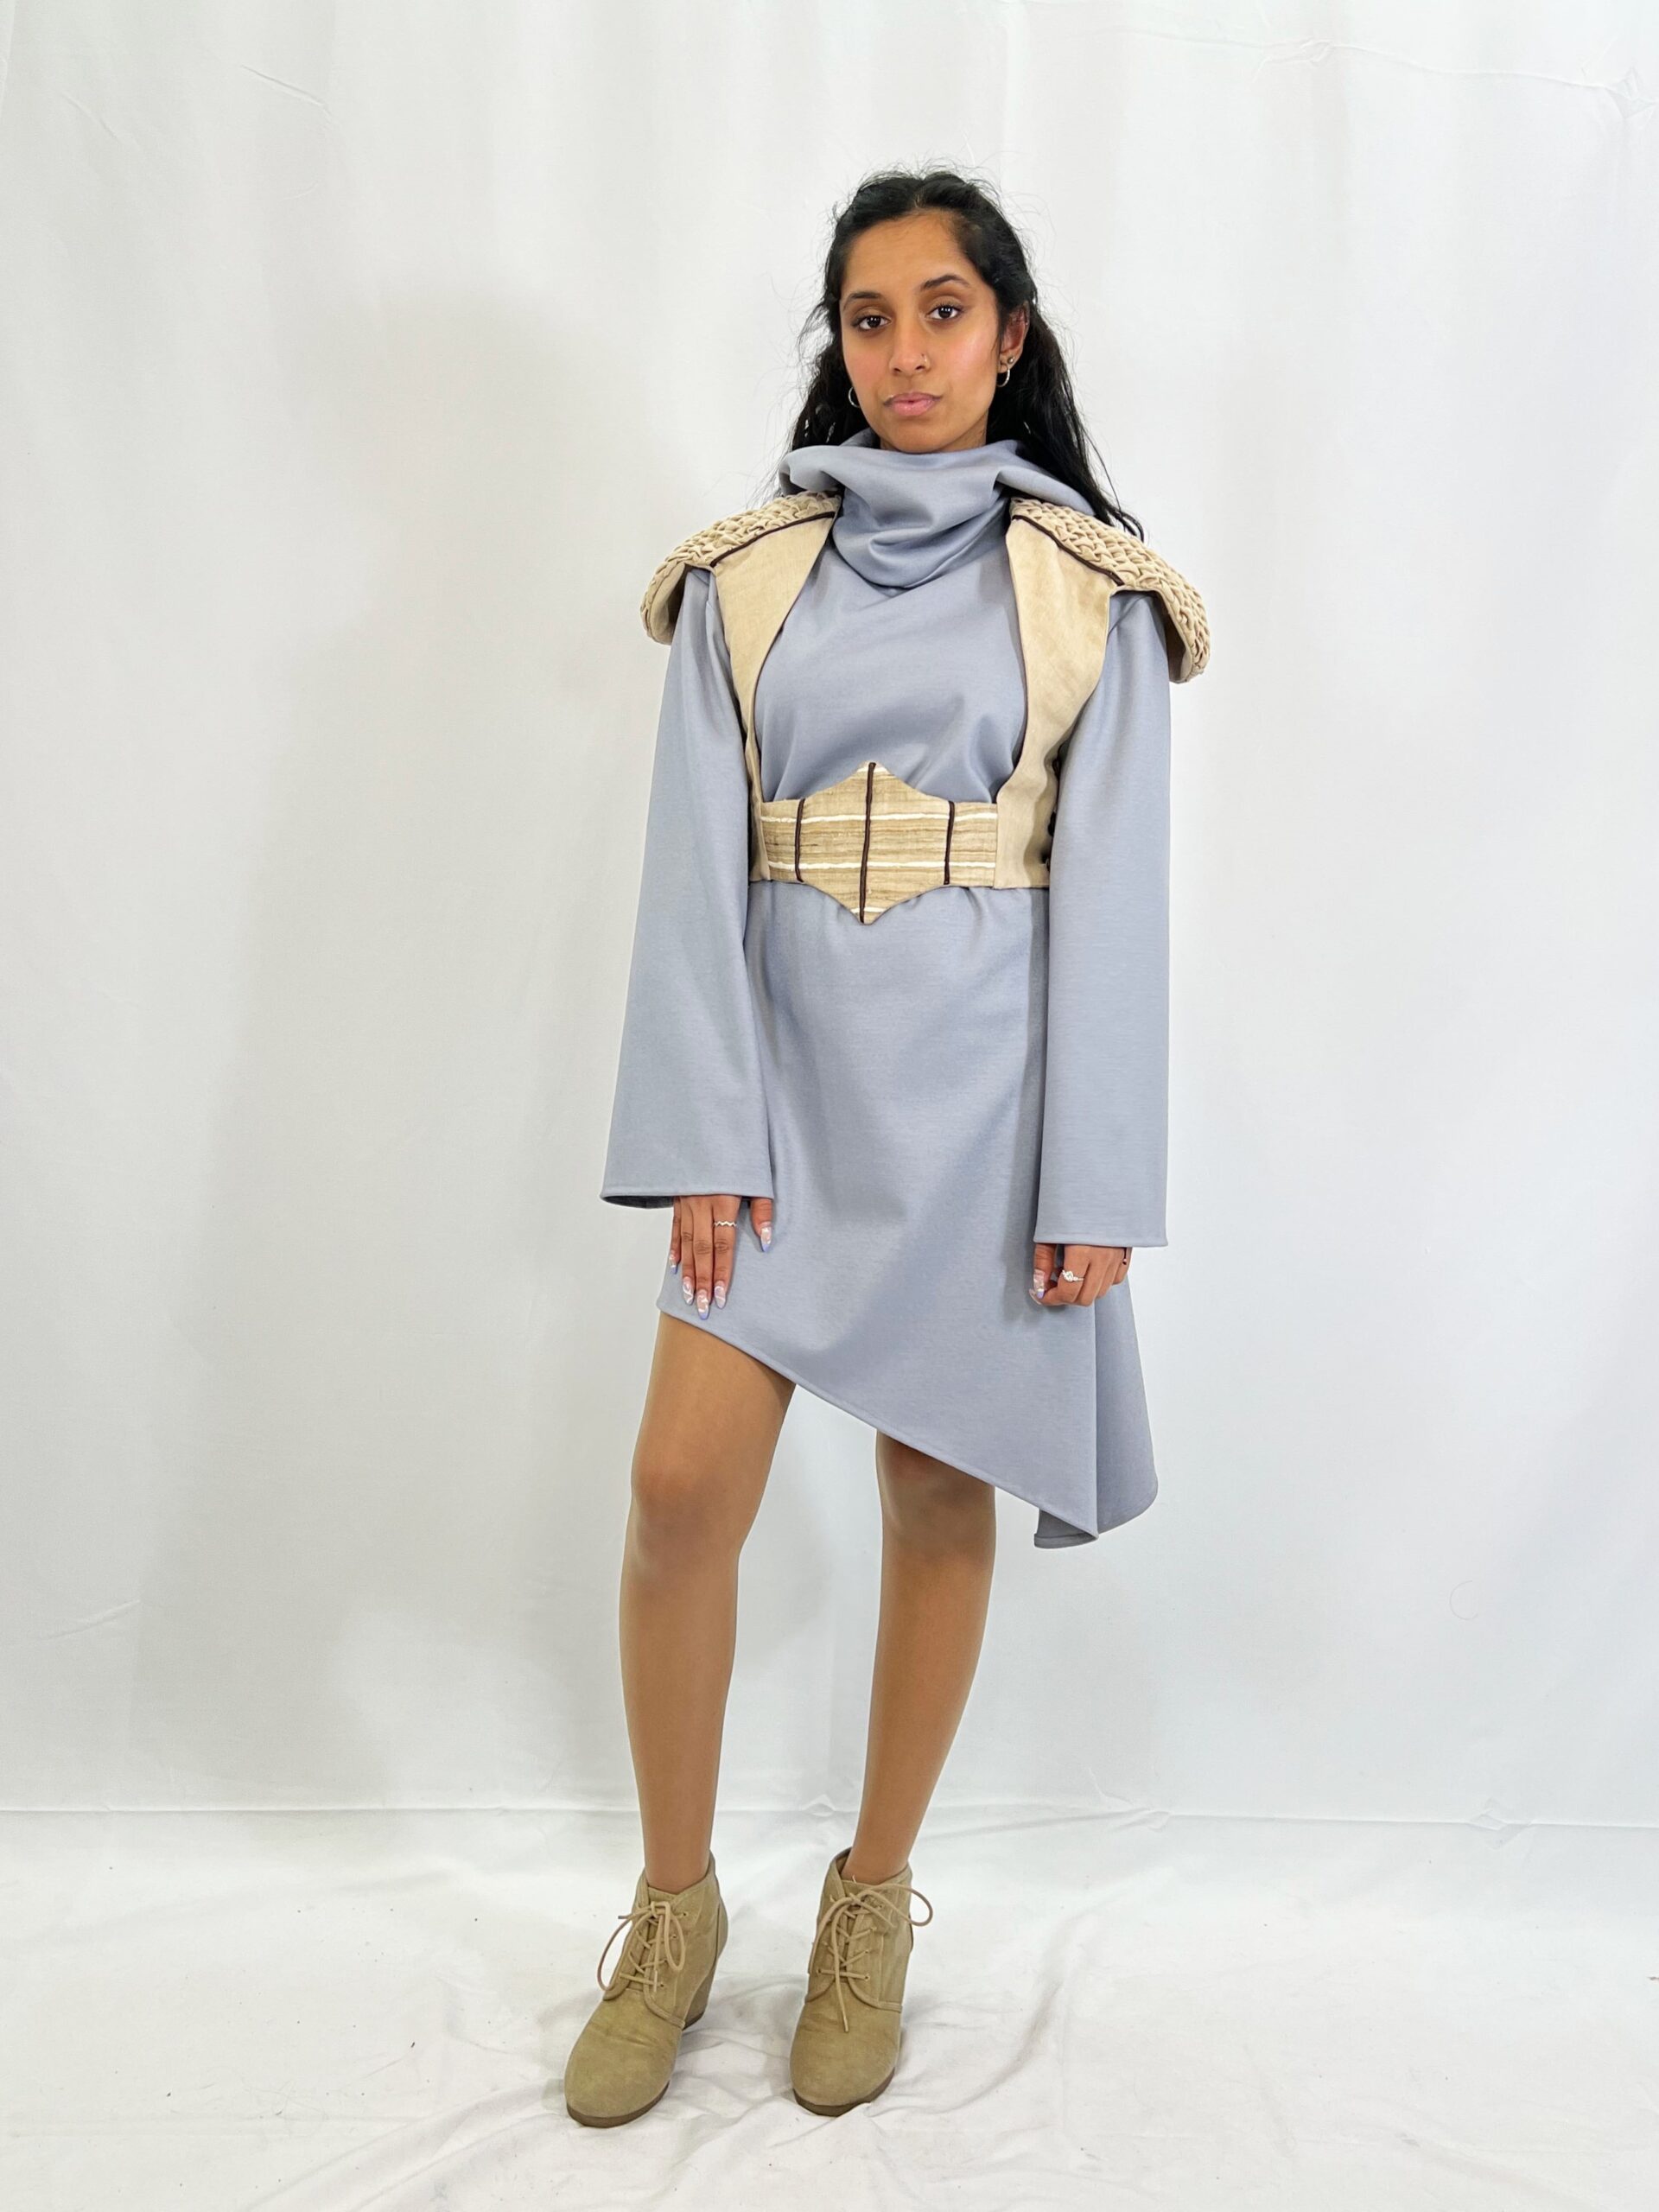 The Hortense look consists of a wool knit asymmetrical hooded dress, and of a linen vest with a contrasting raw silk belt, silk pipping, and hand-sewn smocking on the shoulders. Modelled by Alana Naraine.